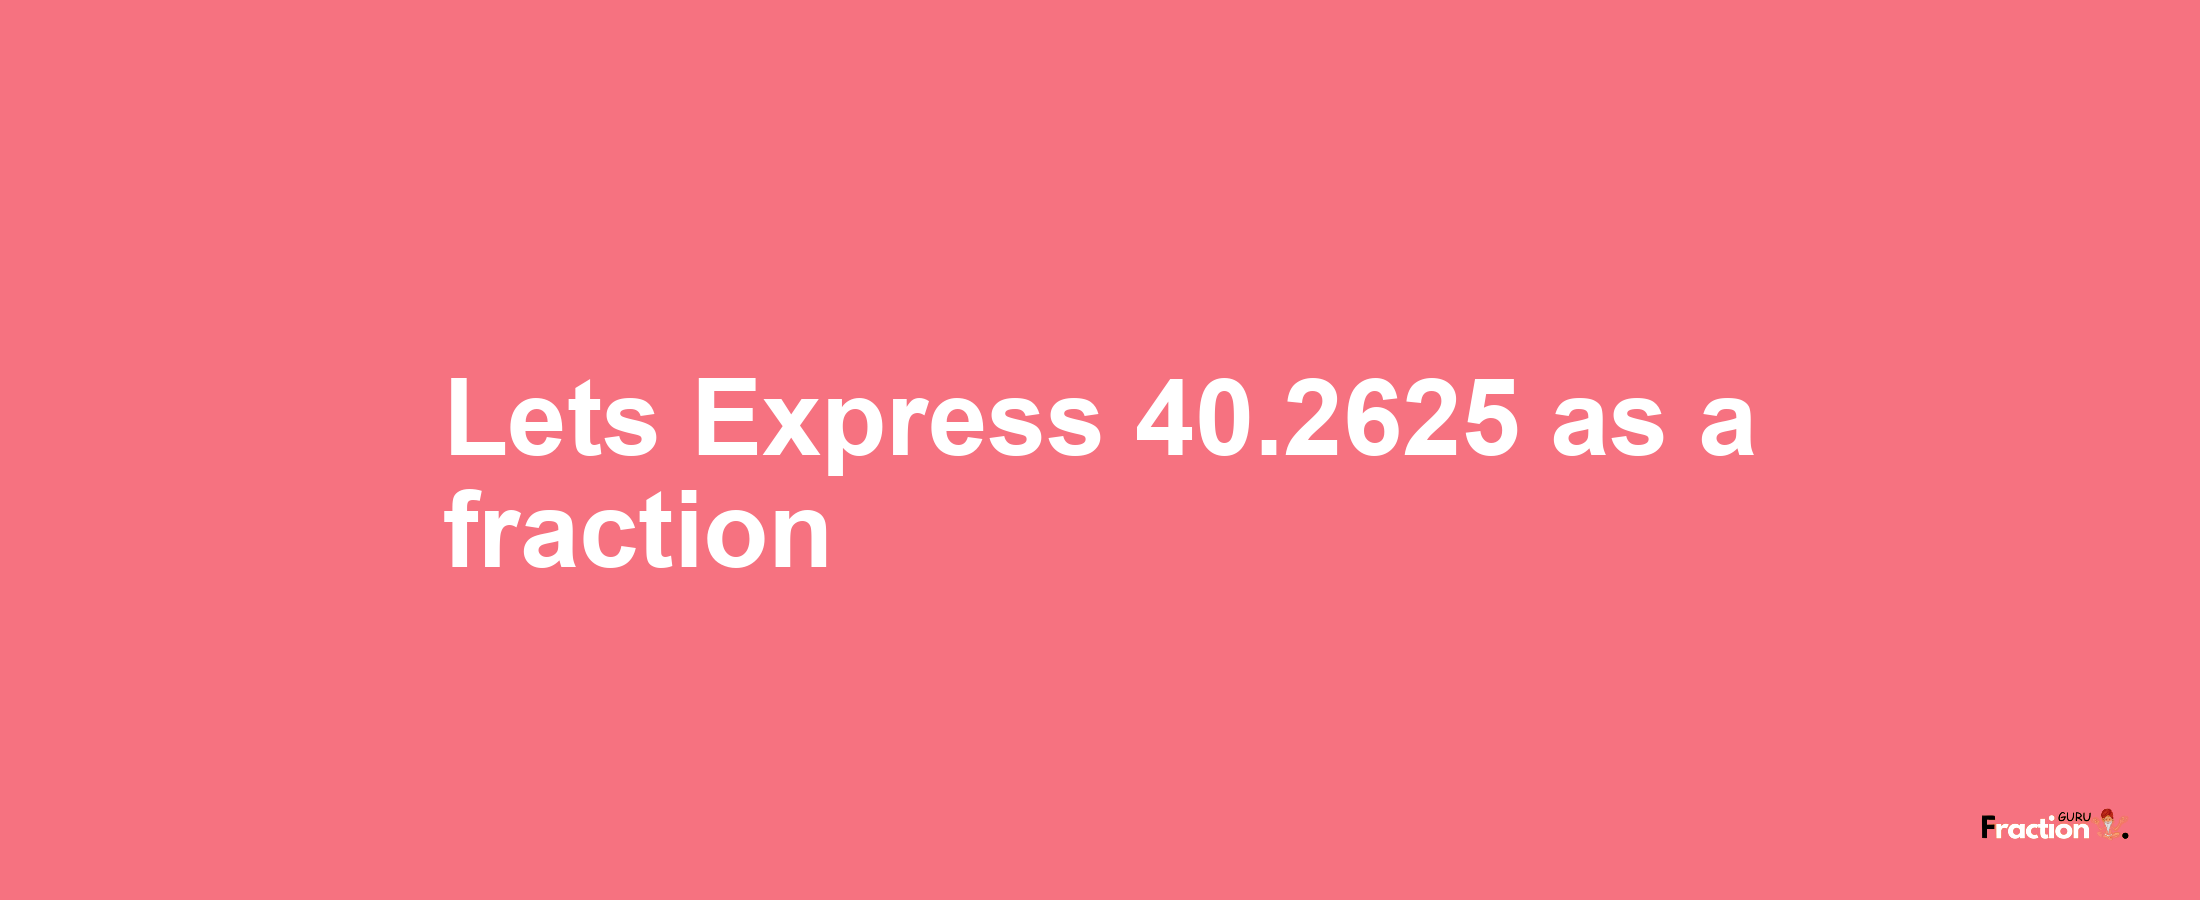 Lets Express 40.2625 as afraction